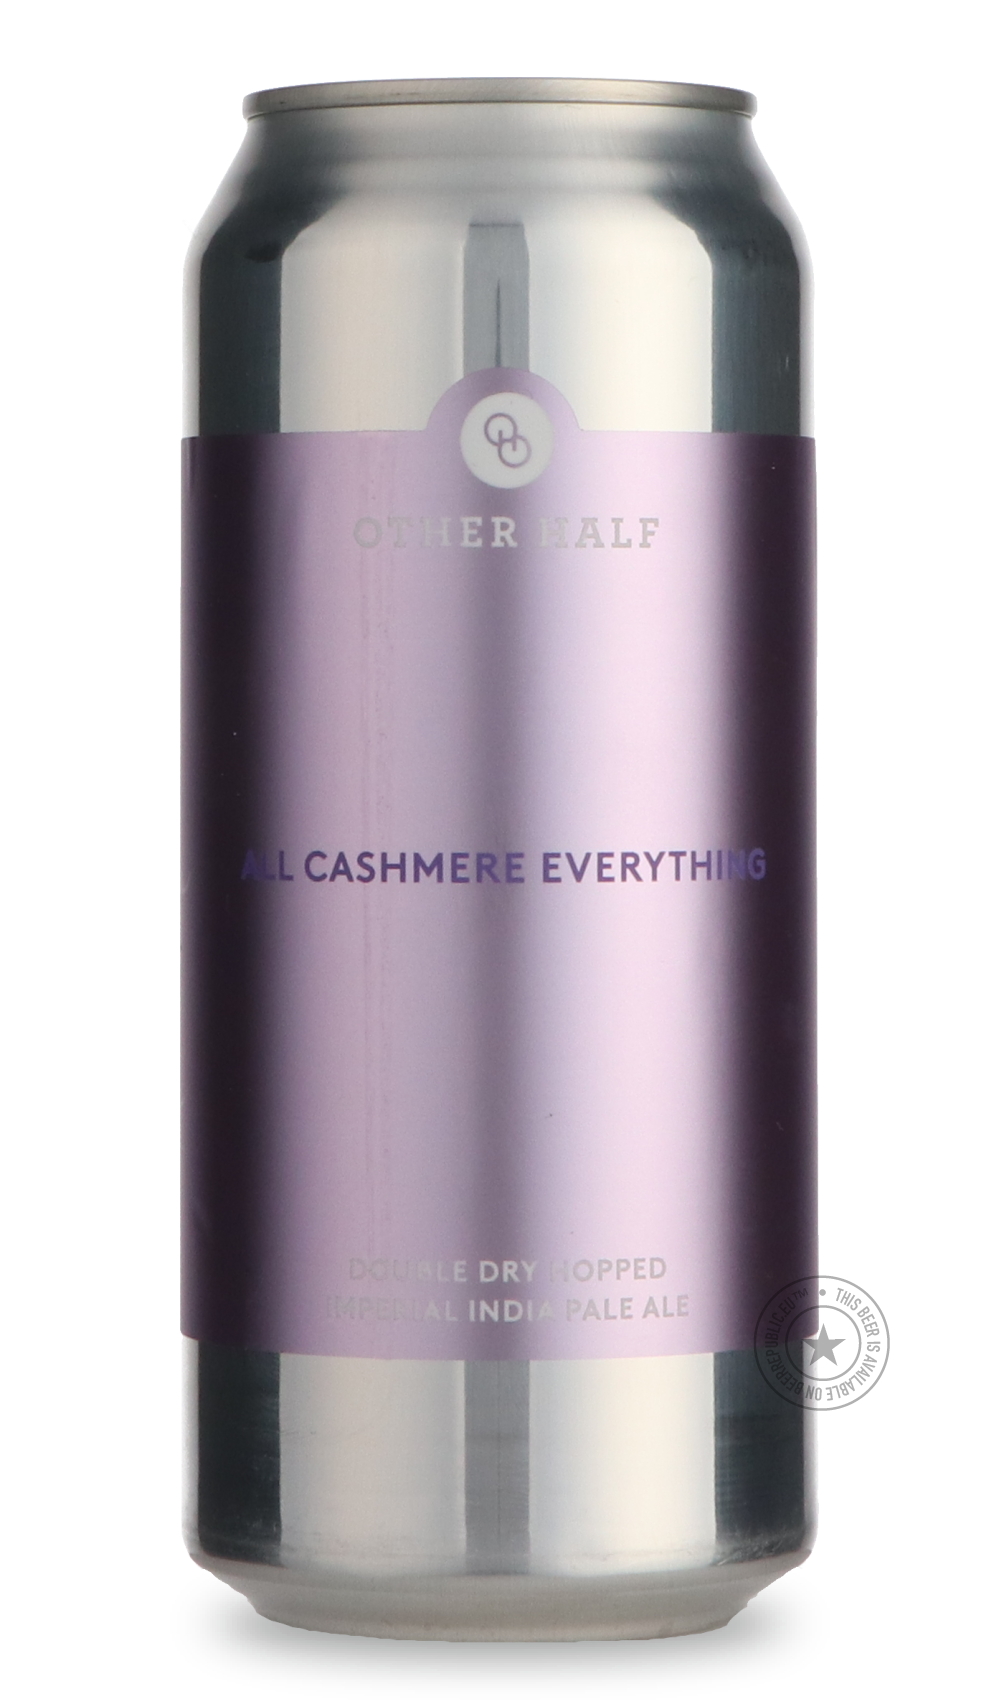 -Other Half- DDH All Cashmere Everything-IPA- Only @ Beer Republic - The best online beer store for American & Canadian craft beer - Buy beer online from the USA and Canada - Bier online kopen - Amerikaans bier kopen - Craft beer store - Craft beer kopen - Amerikanisch bier kaufen - Bier online kaufen - Acheter biere online - IPA - Stout - Porter - New England IPA - Hazy IPA - Imperial Stout - Barrel Aged - Barrel Aged Imperial Stout - Brown - Dark beer - Blond - Blonde - Pilsner - Lager - Wheat - Weizen - 